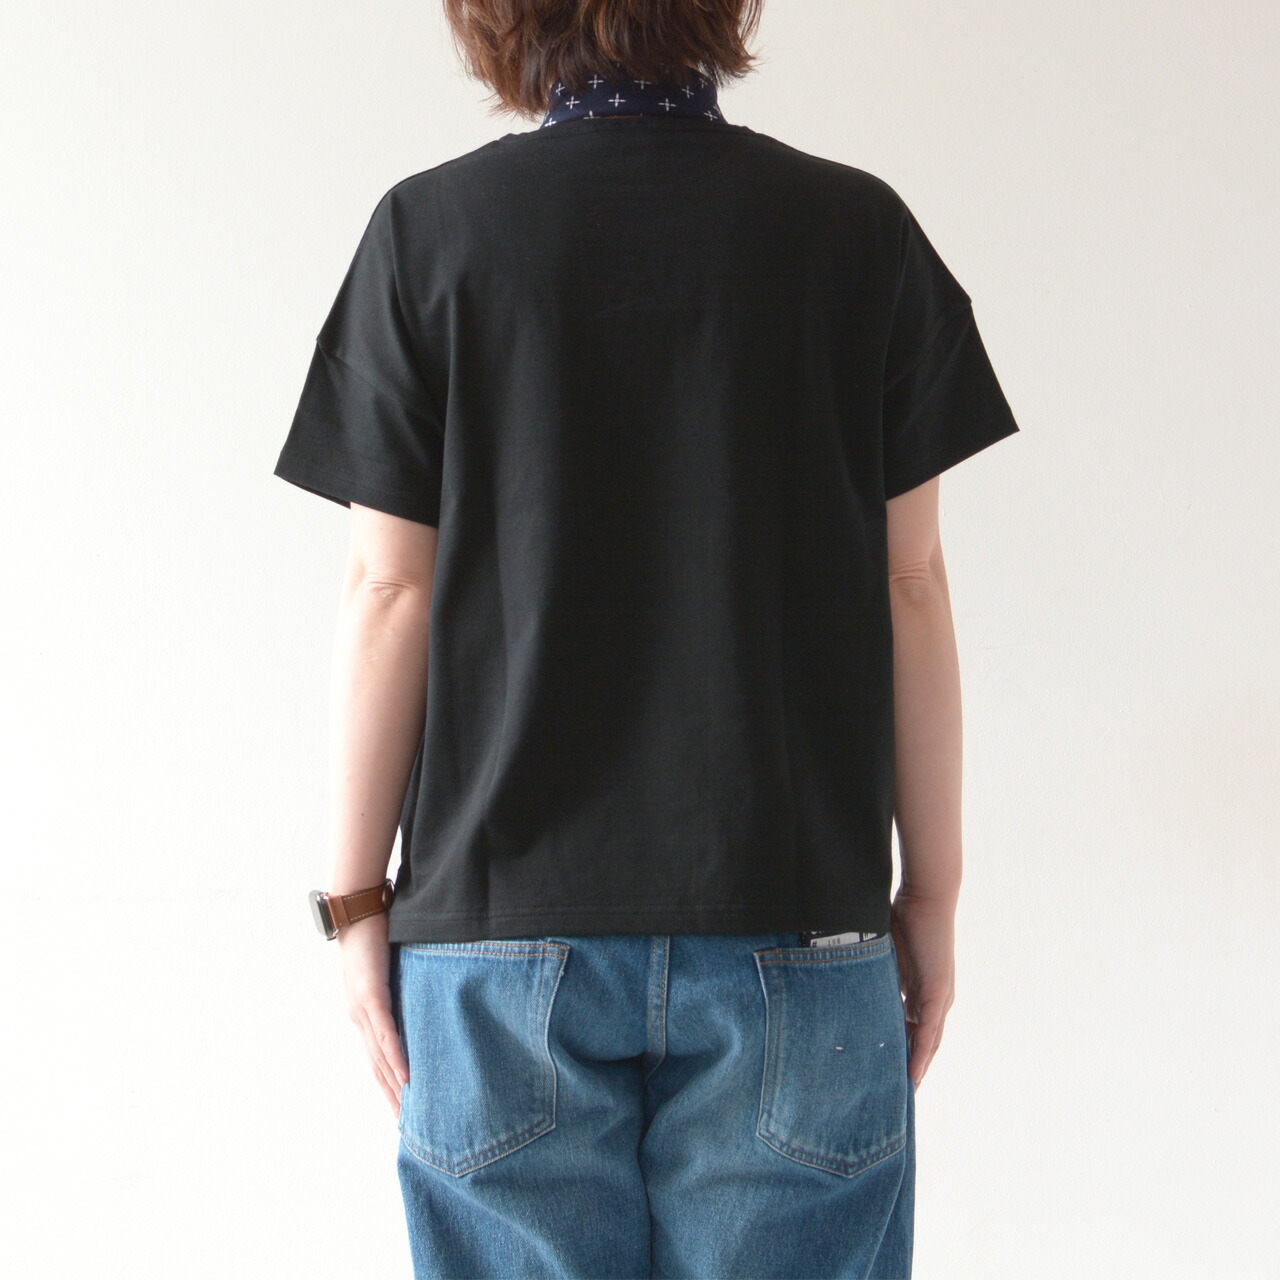 ORCIVAL [オーチバル・オーシバル] 40/2 JERSEY BOAT NECK S/S WIDE TEE SOLID [RC-9255]_f0051306_05330601.jpg